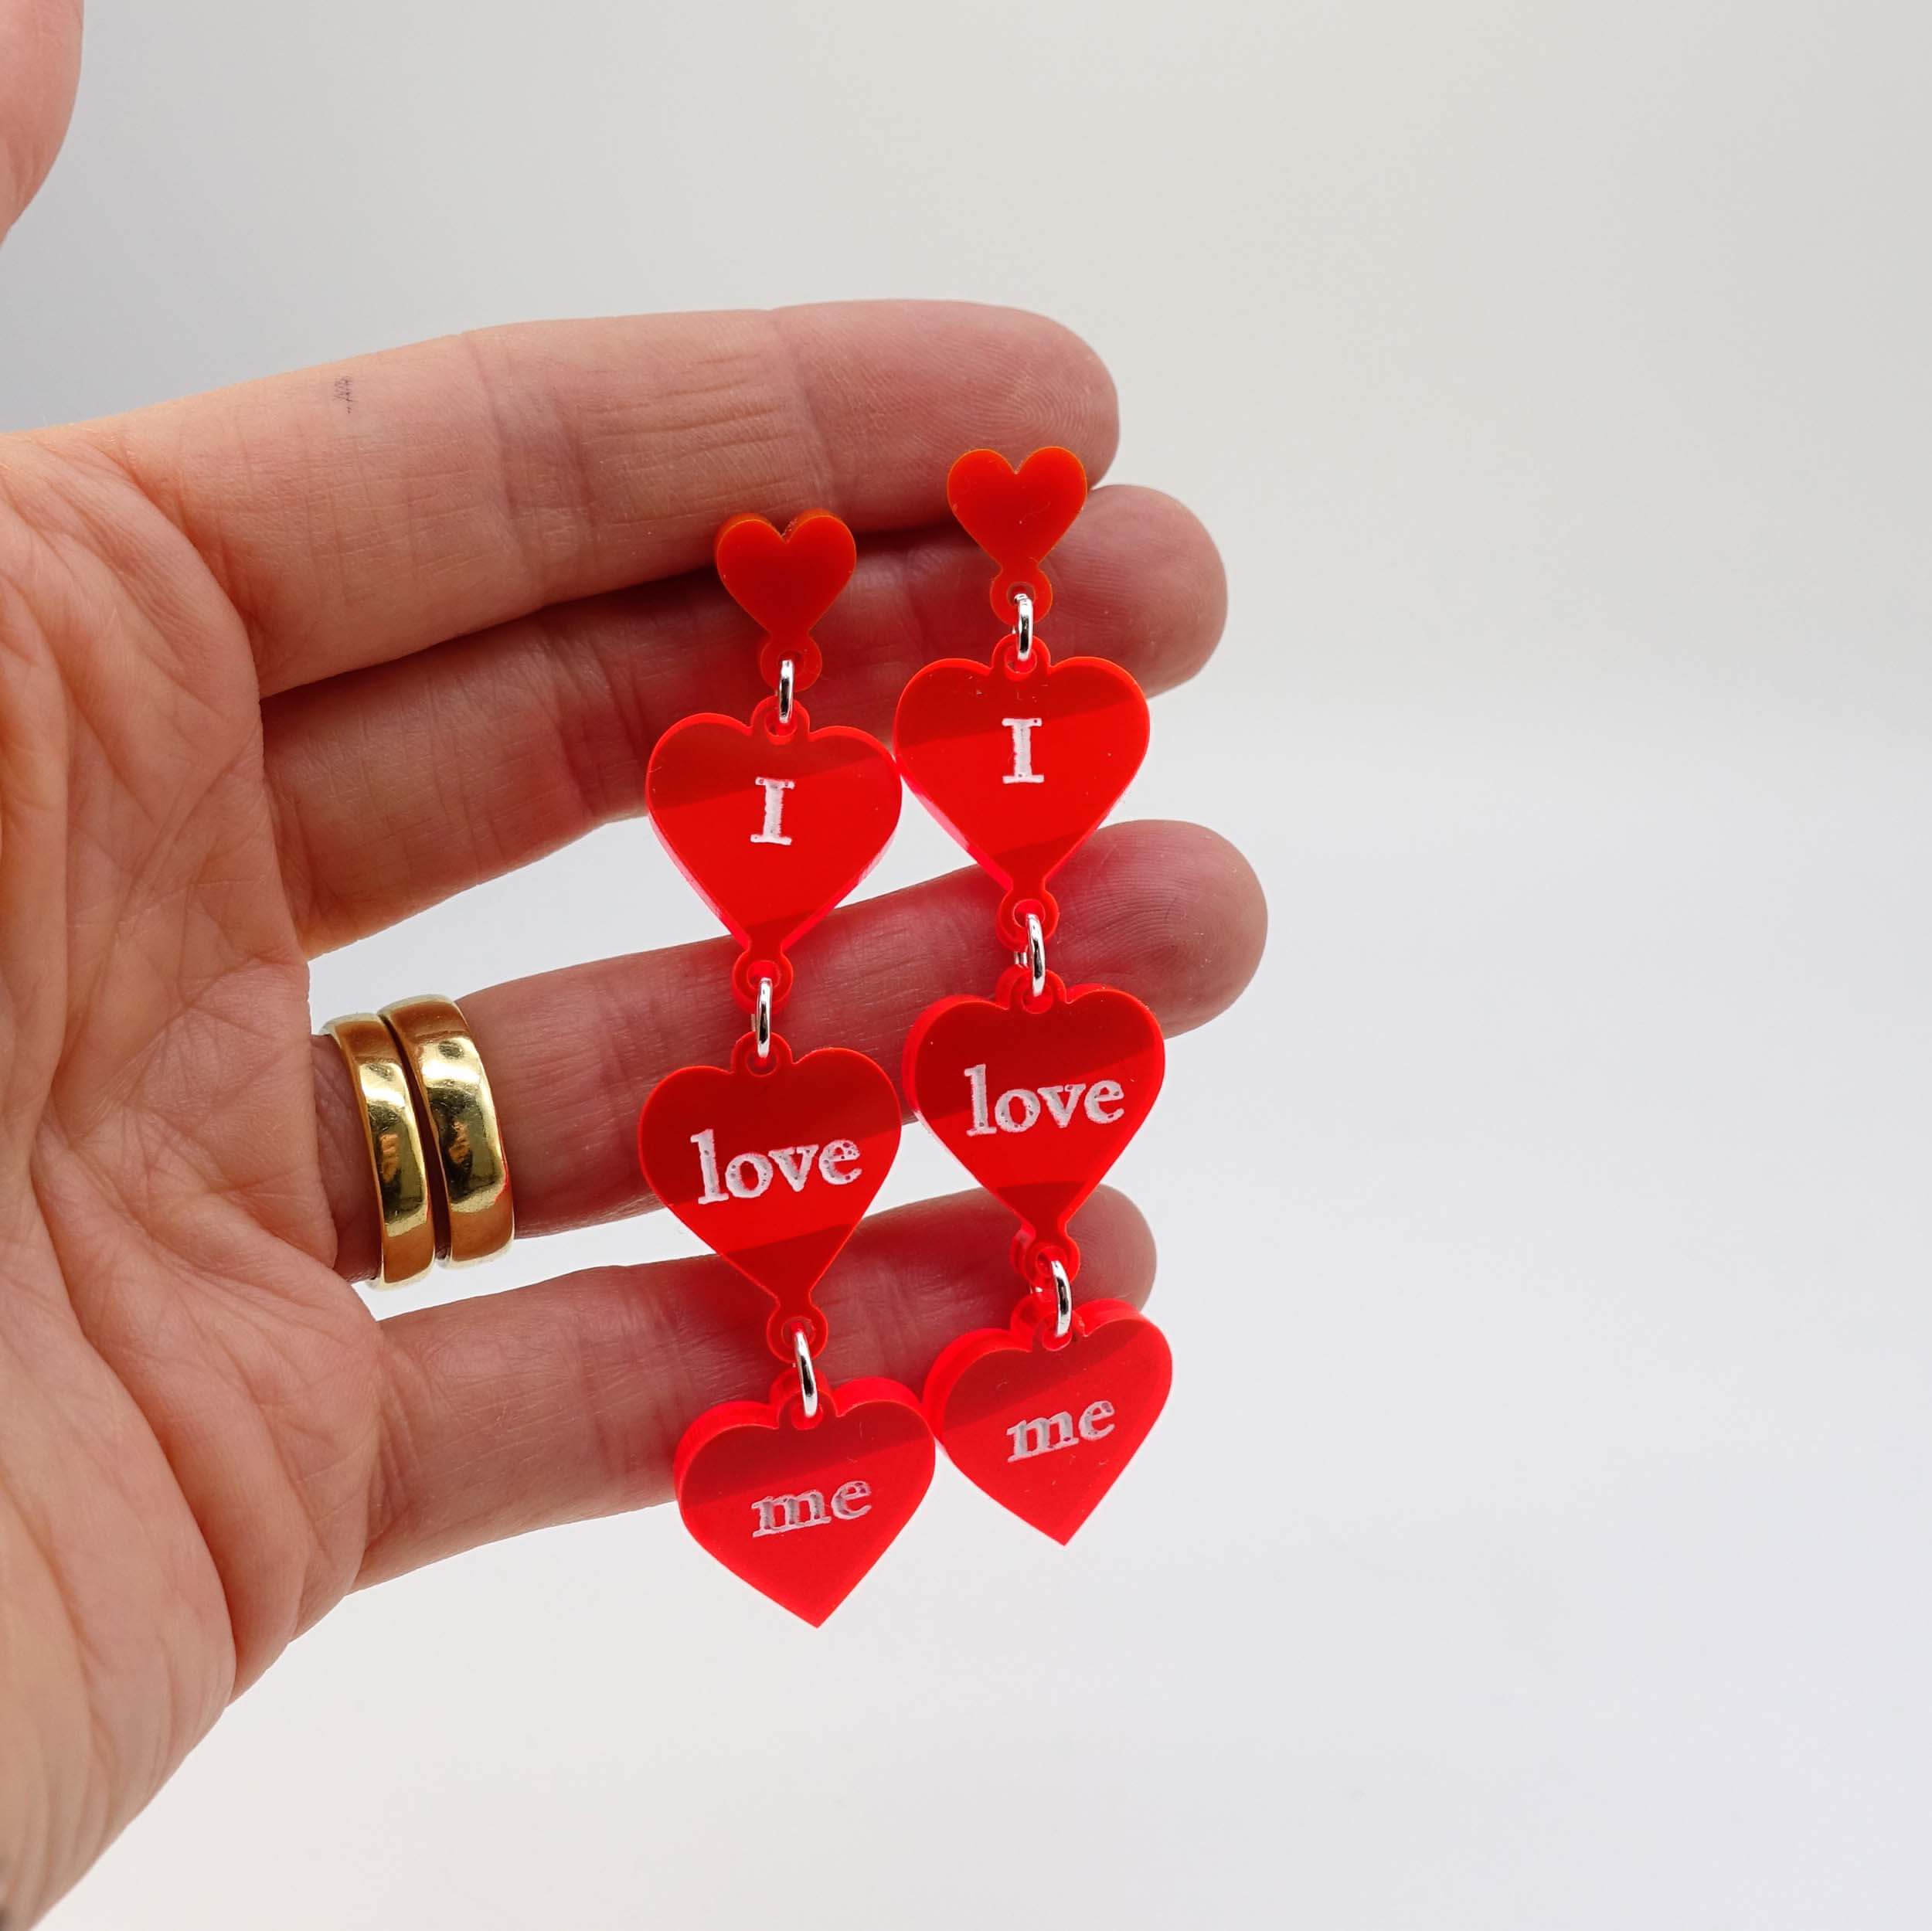 I love me heart drop earrings in hot red shown held up for scale. 